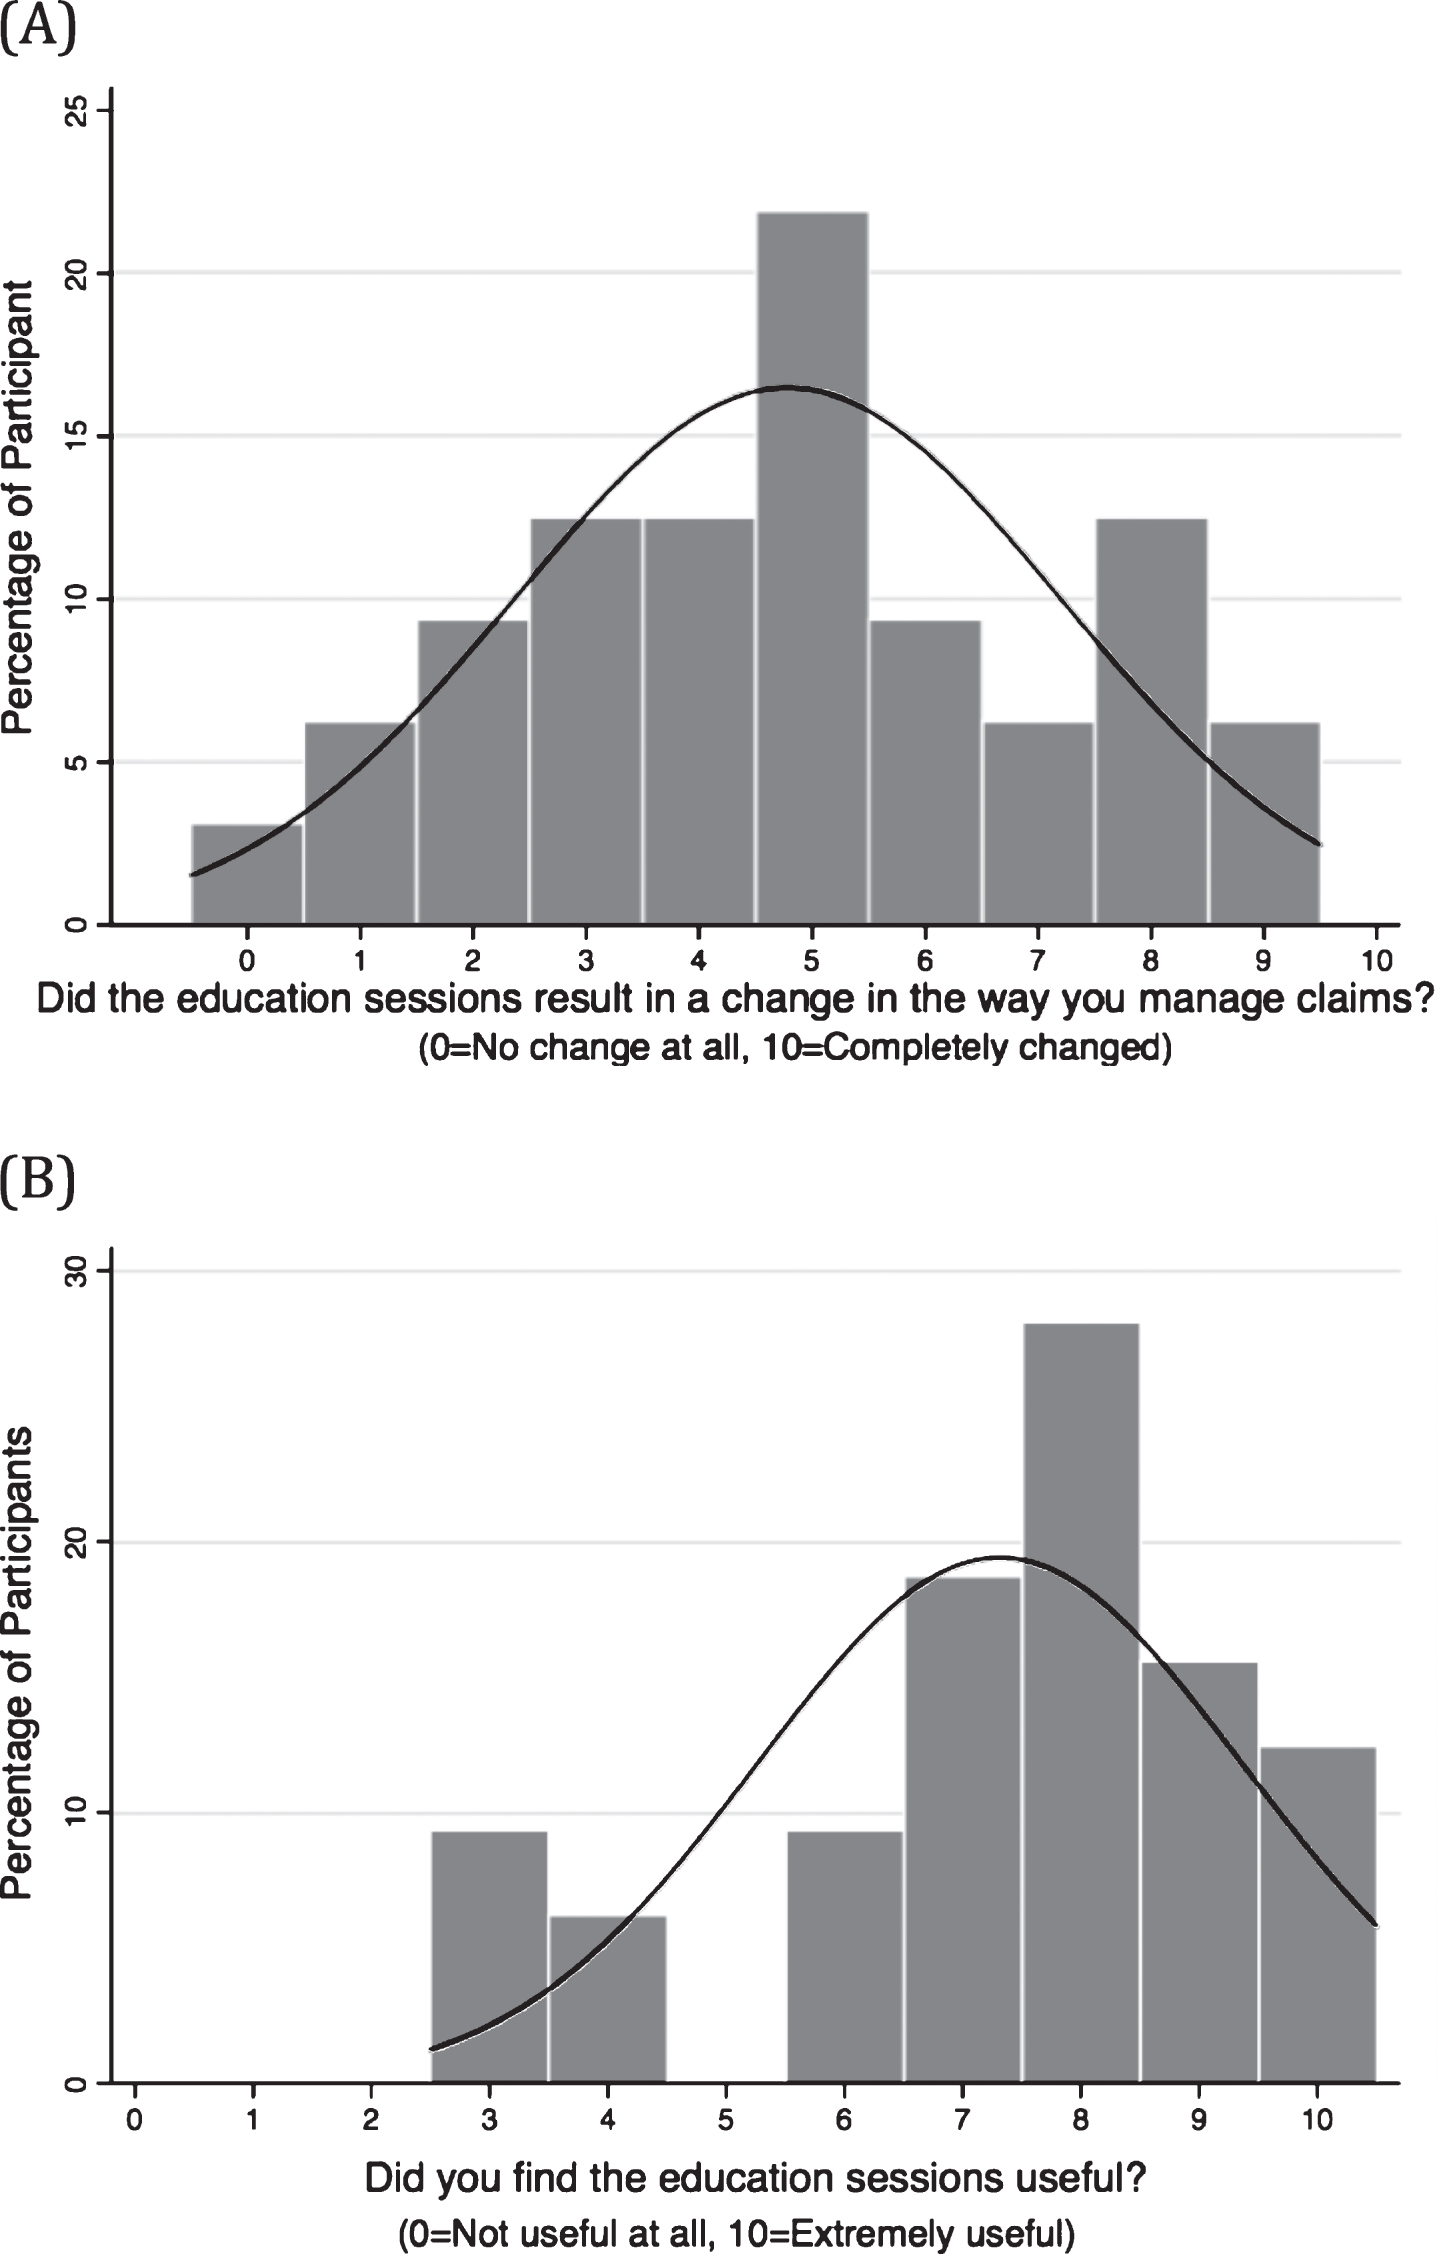 Insurance workers self-perceived change in claims management behaviour (A) and perception of usefulness of the biopsychosocially informed education sessions (B) at the three-month follow-up time point.